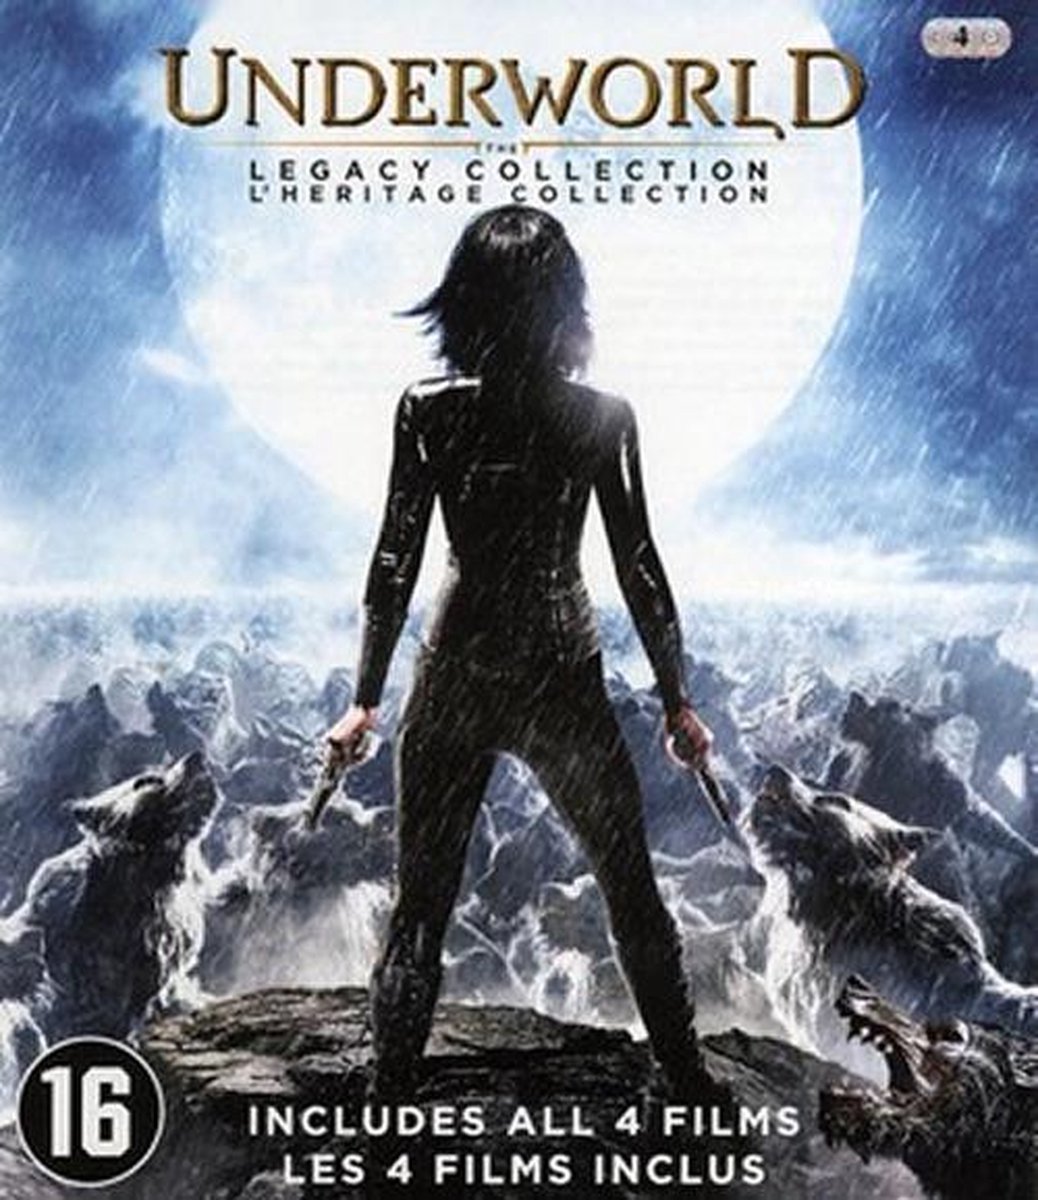 Underworld - The Legacy Collection (Blu-ray) - 